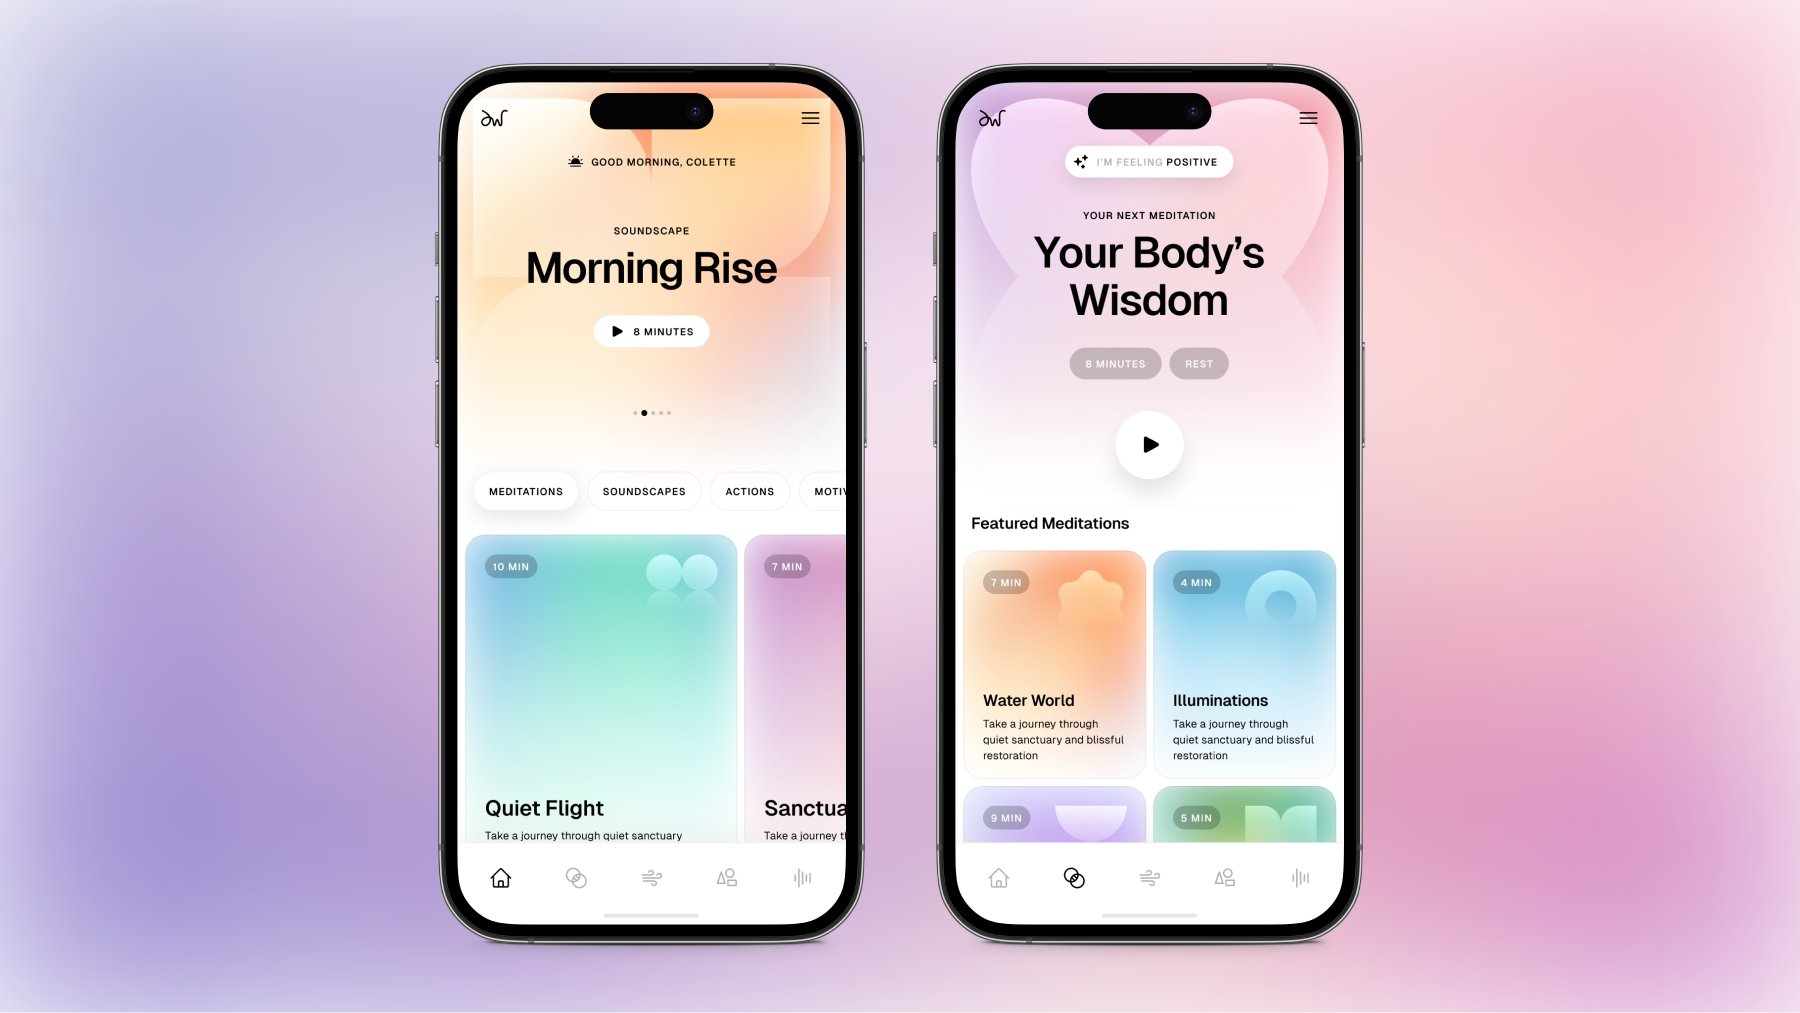 Style Exploration for this Meditation App